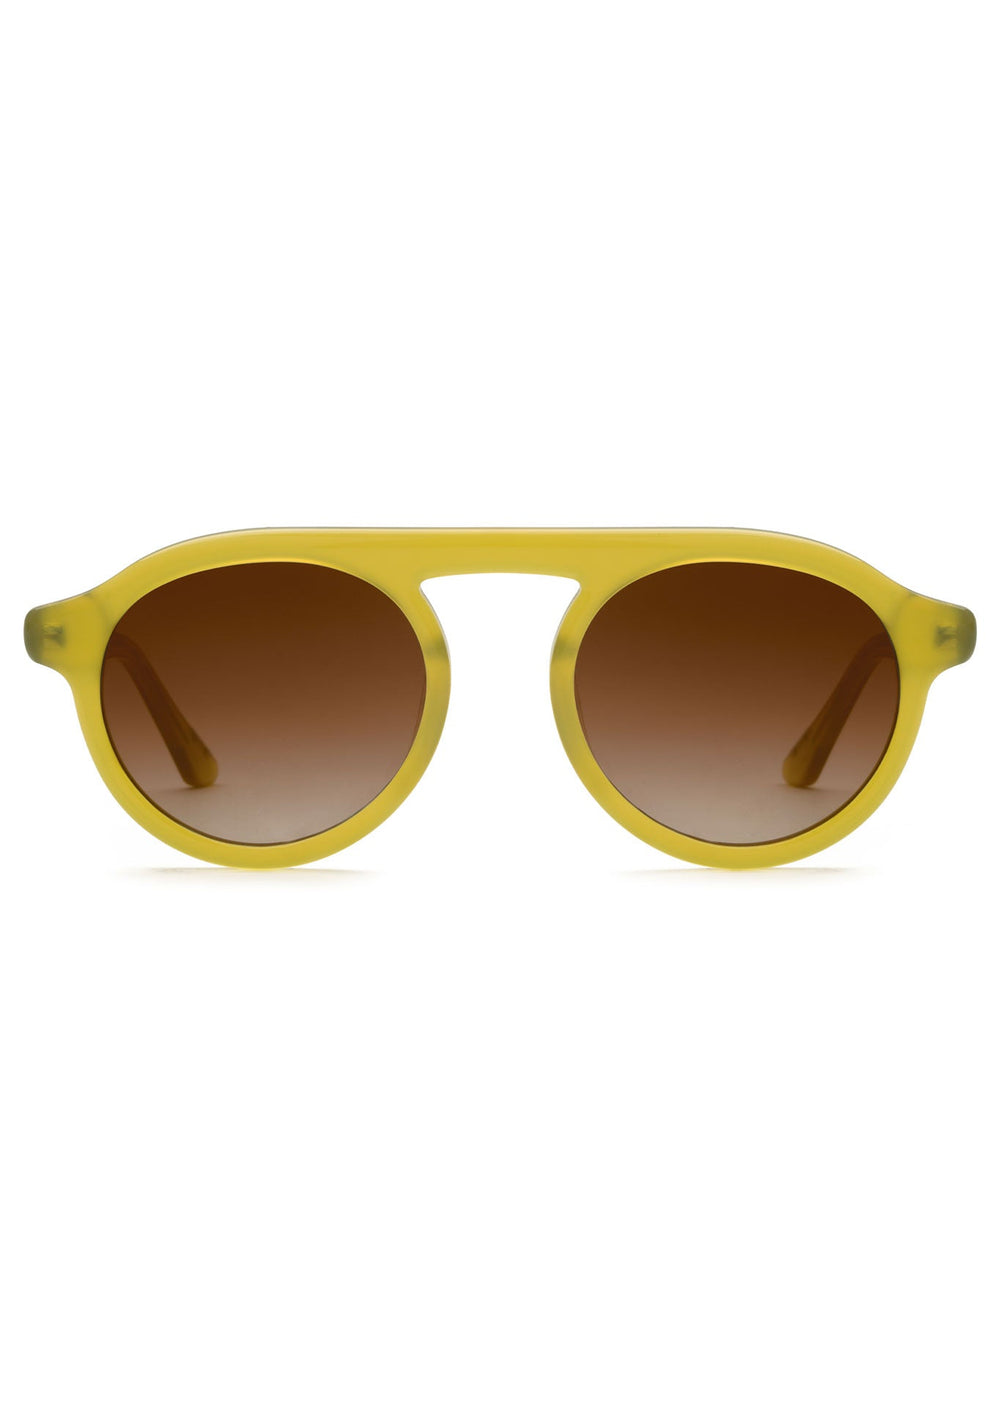 KREWE SUNGLASSES - CAMERON | Chartreuse handcrafted, luxury yellow acetate round frames 